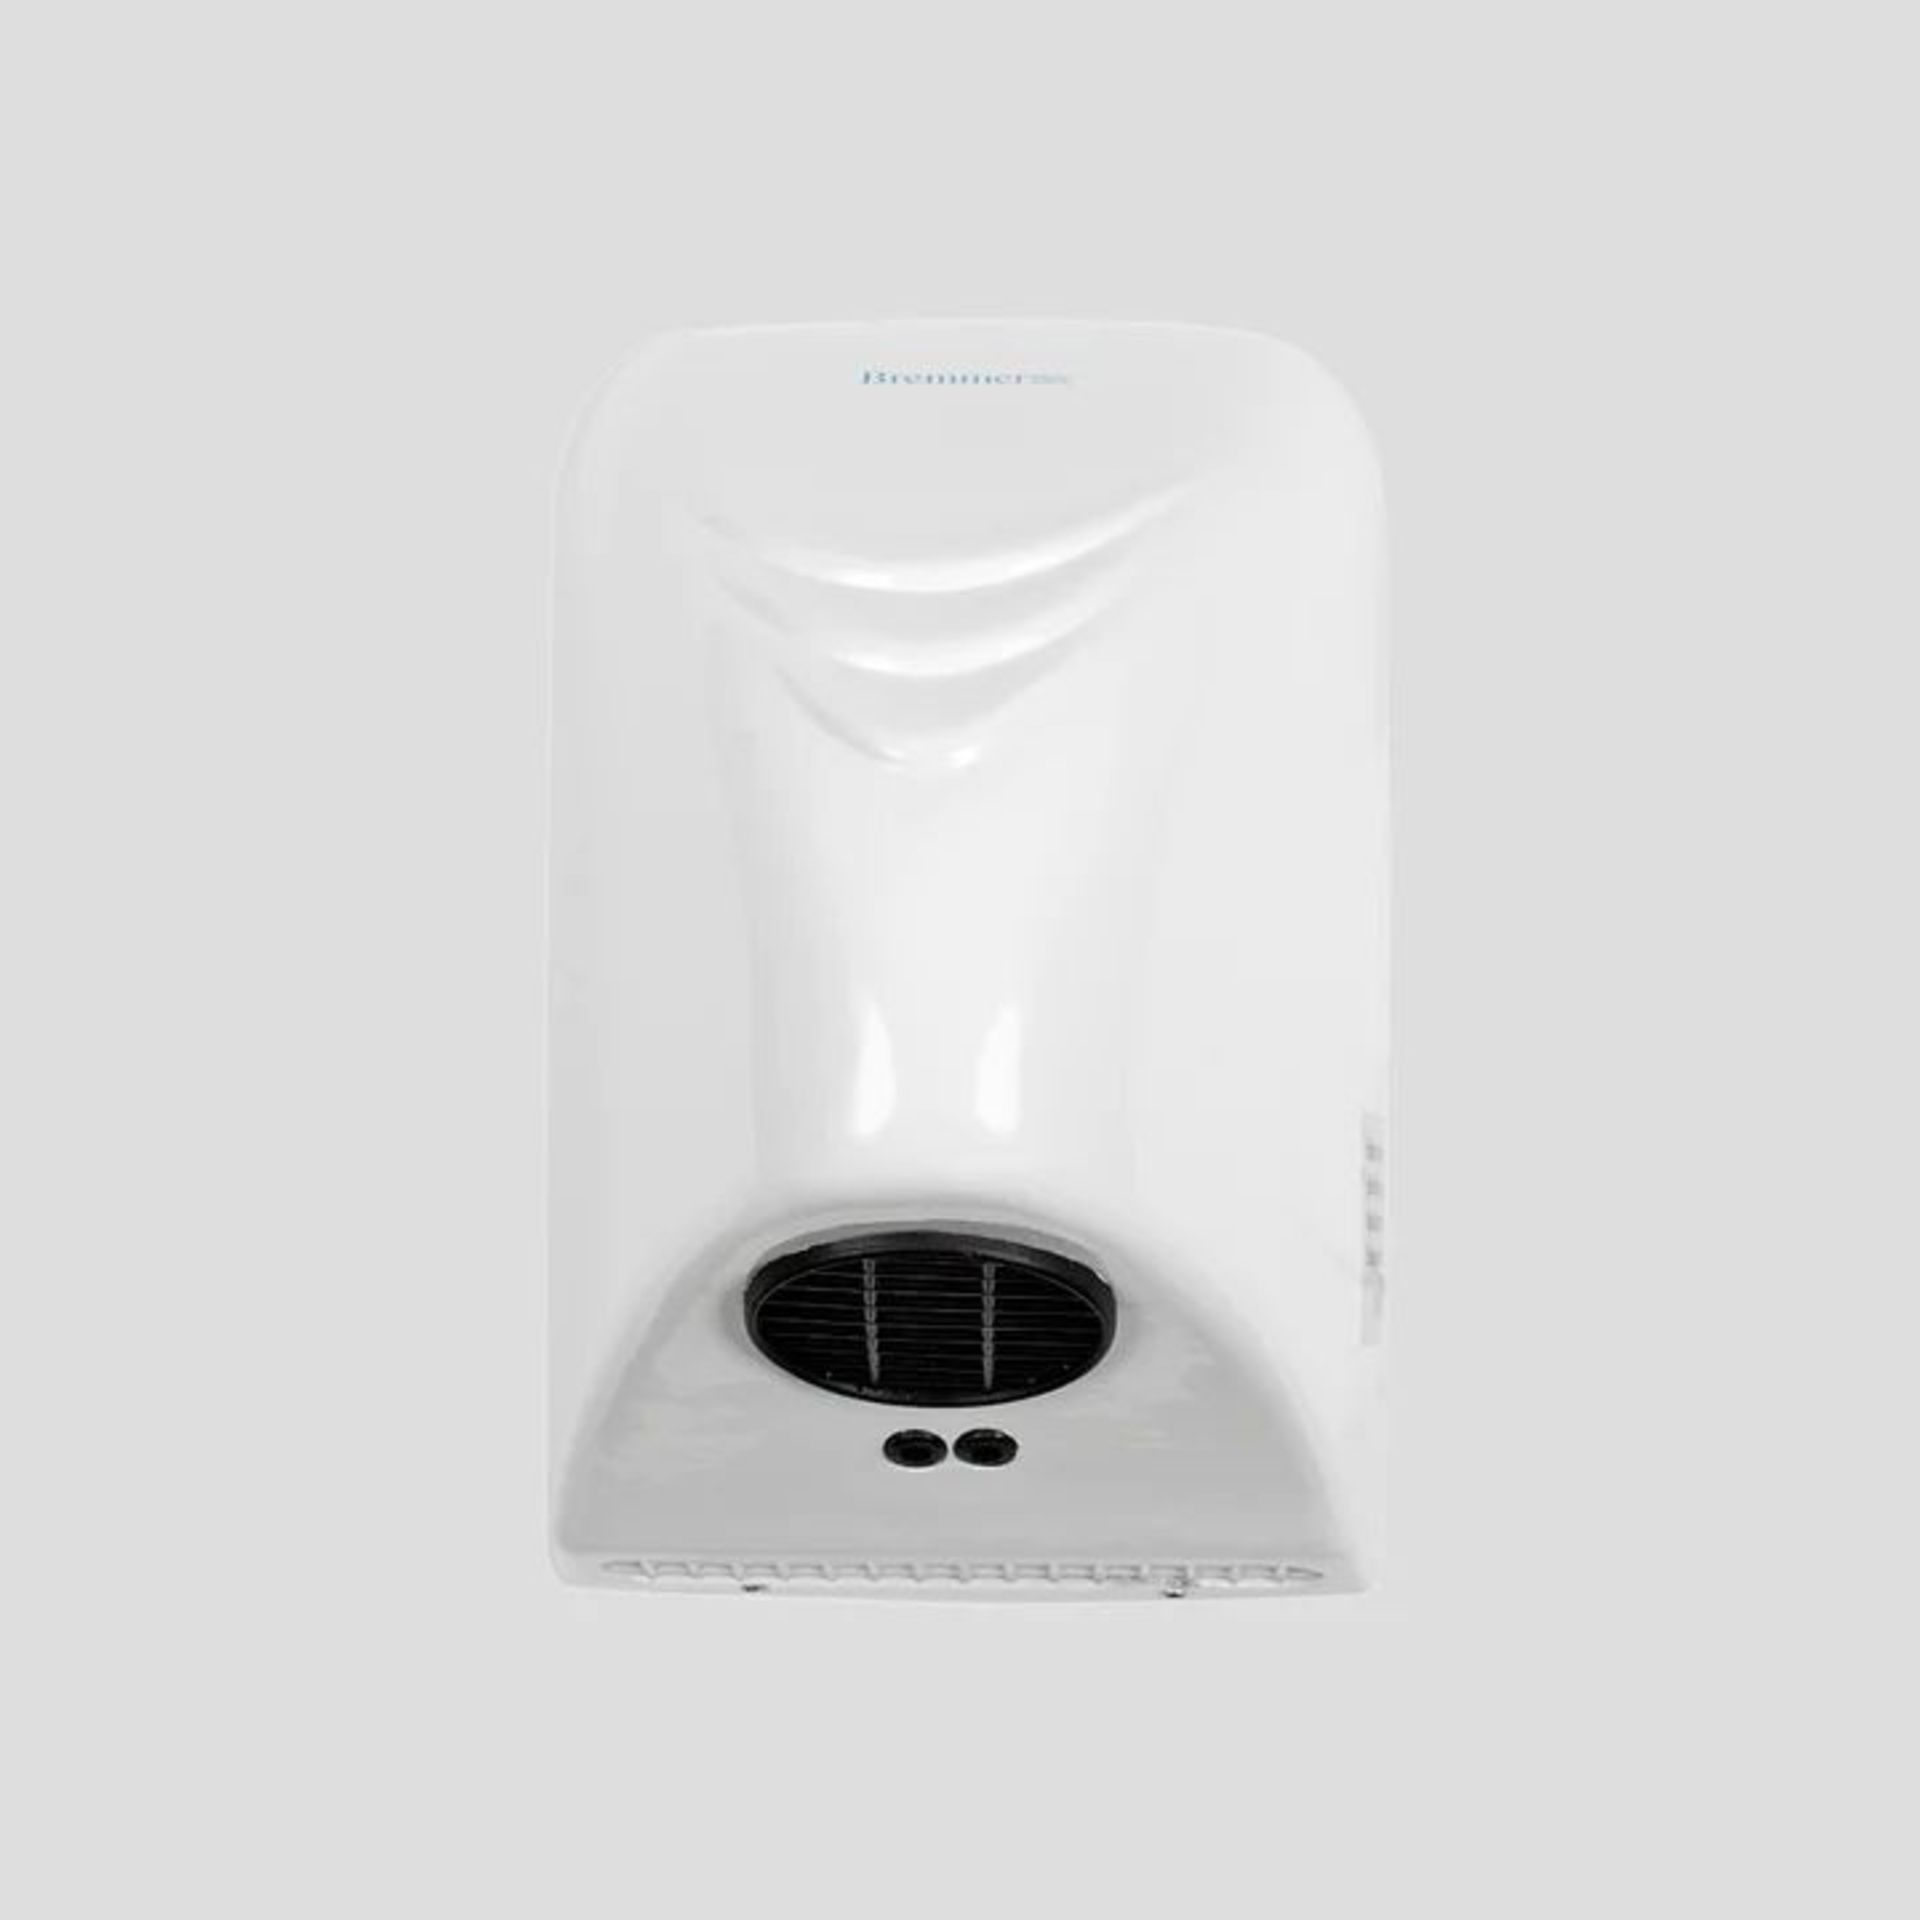 4 X BRAND NEW BREMER AUTOMATIC HAND DRYERS R12.8